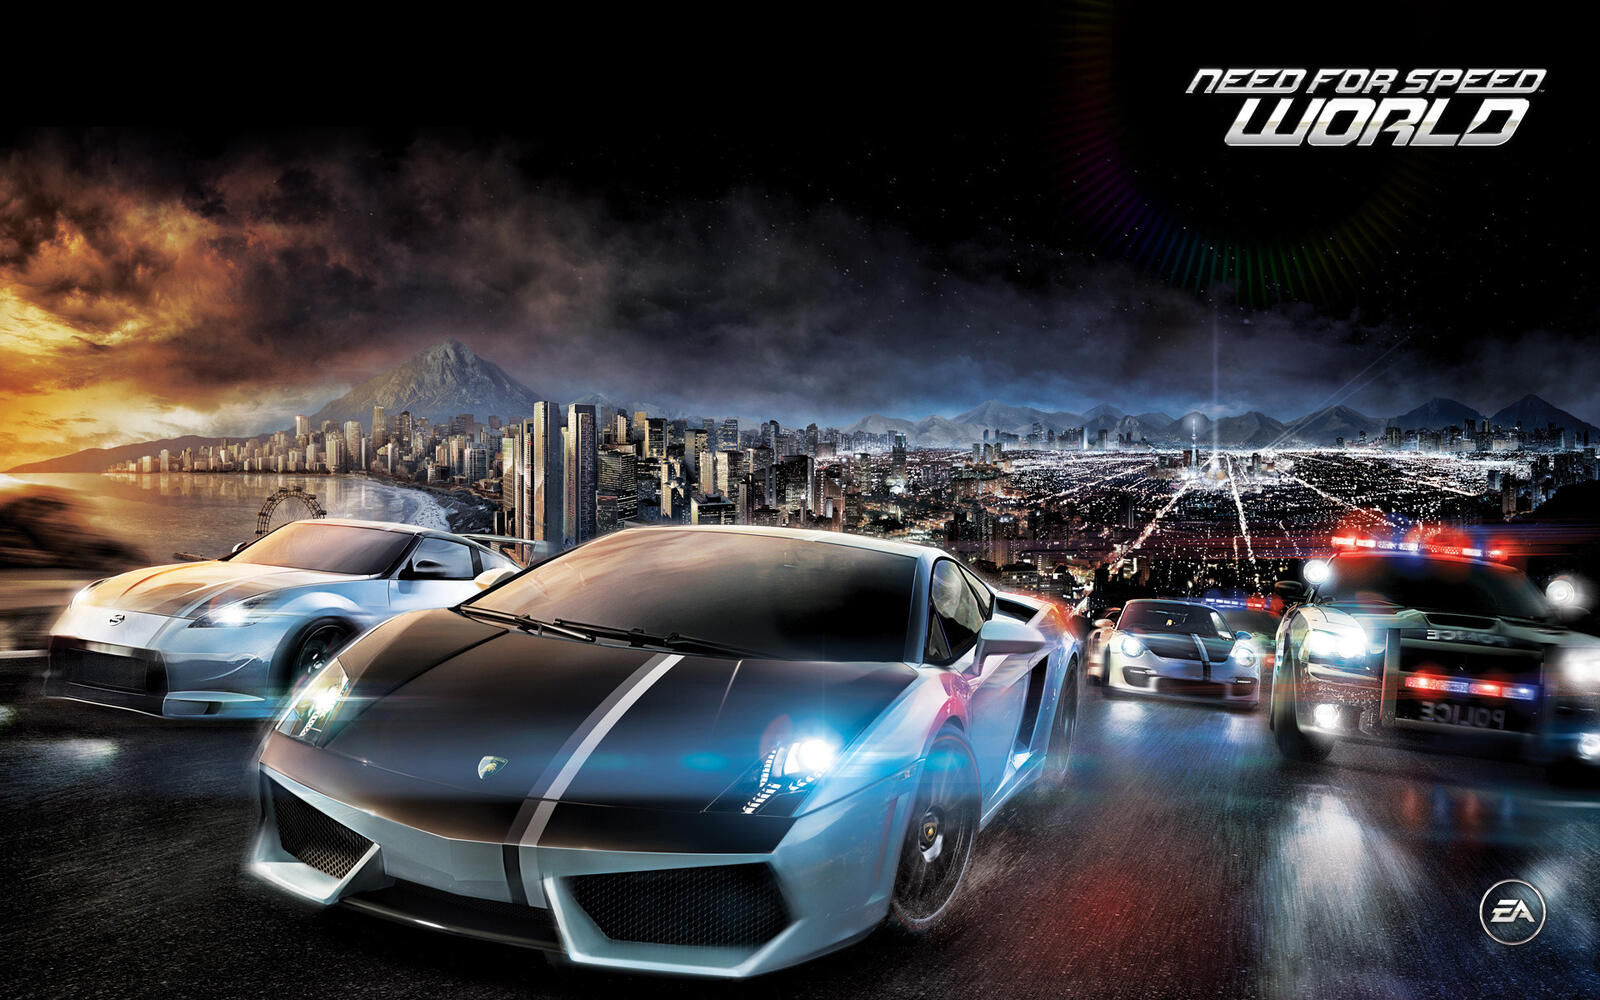 Wallpapers need for speed city night on the desktop